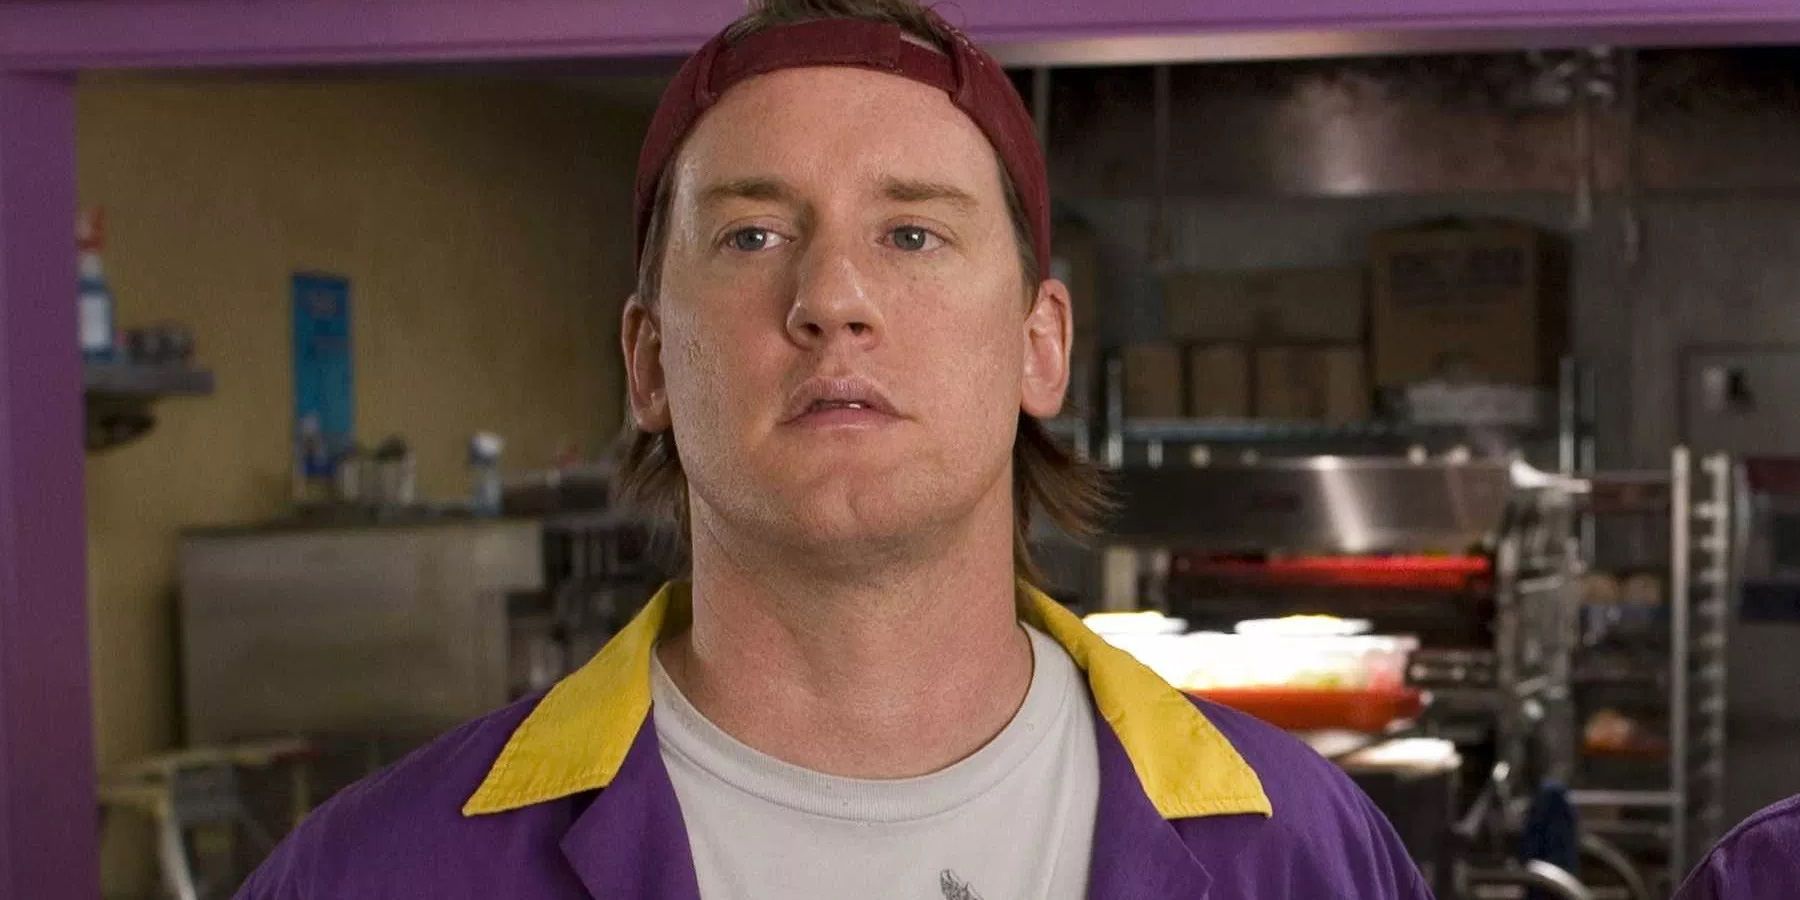 Kevin Smiths 10 Best Recurring Actors Ranked By Appearances